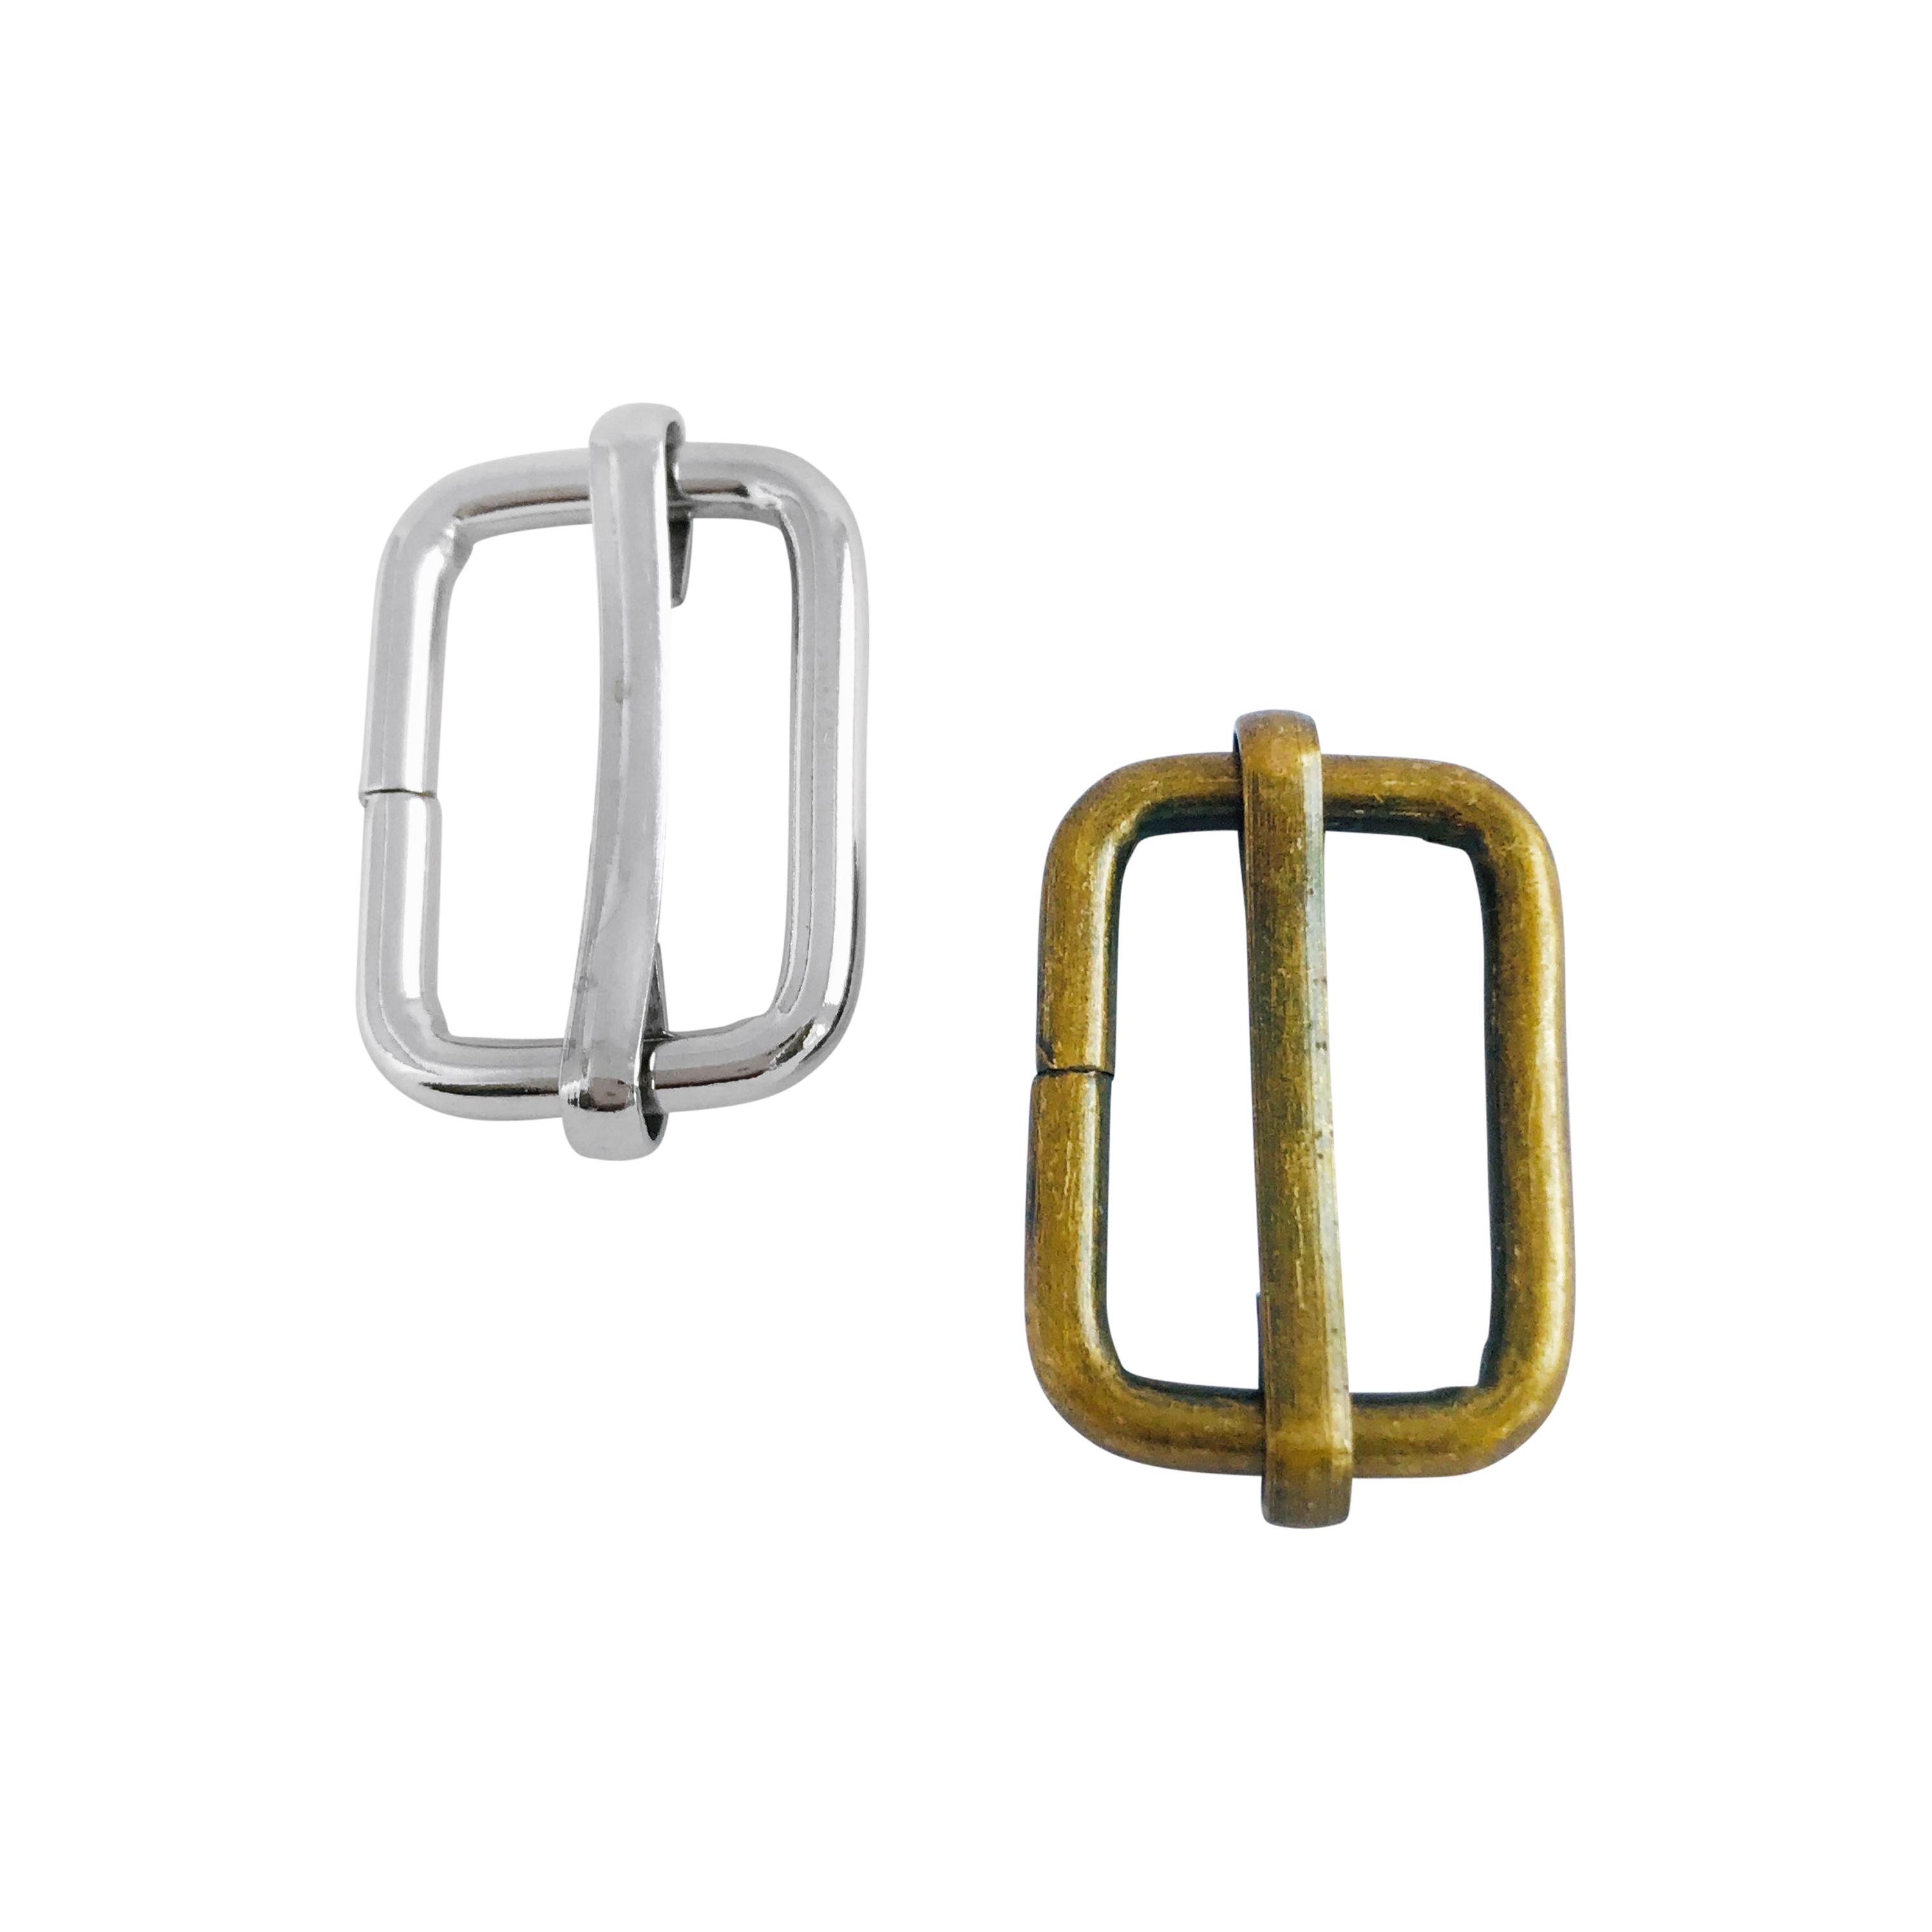 1" (25mm) wire form slider buckle to make adjustable bag straps and handles, available in silver or antique brass